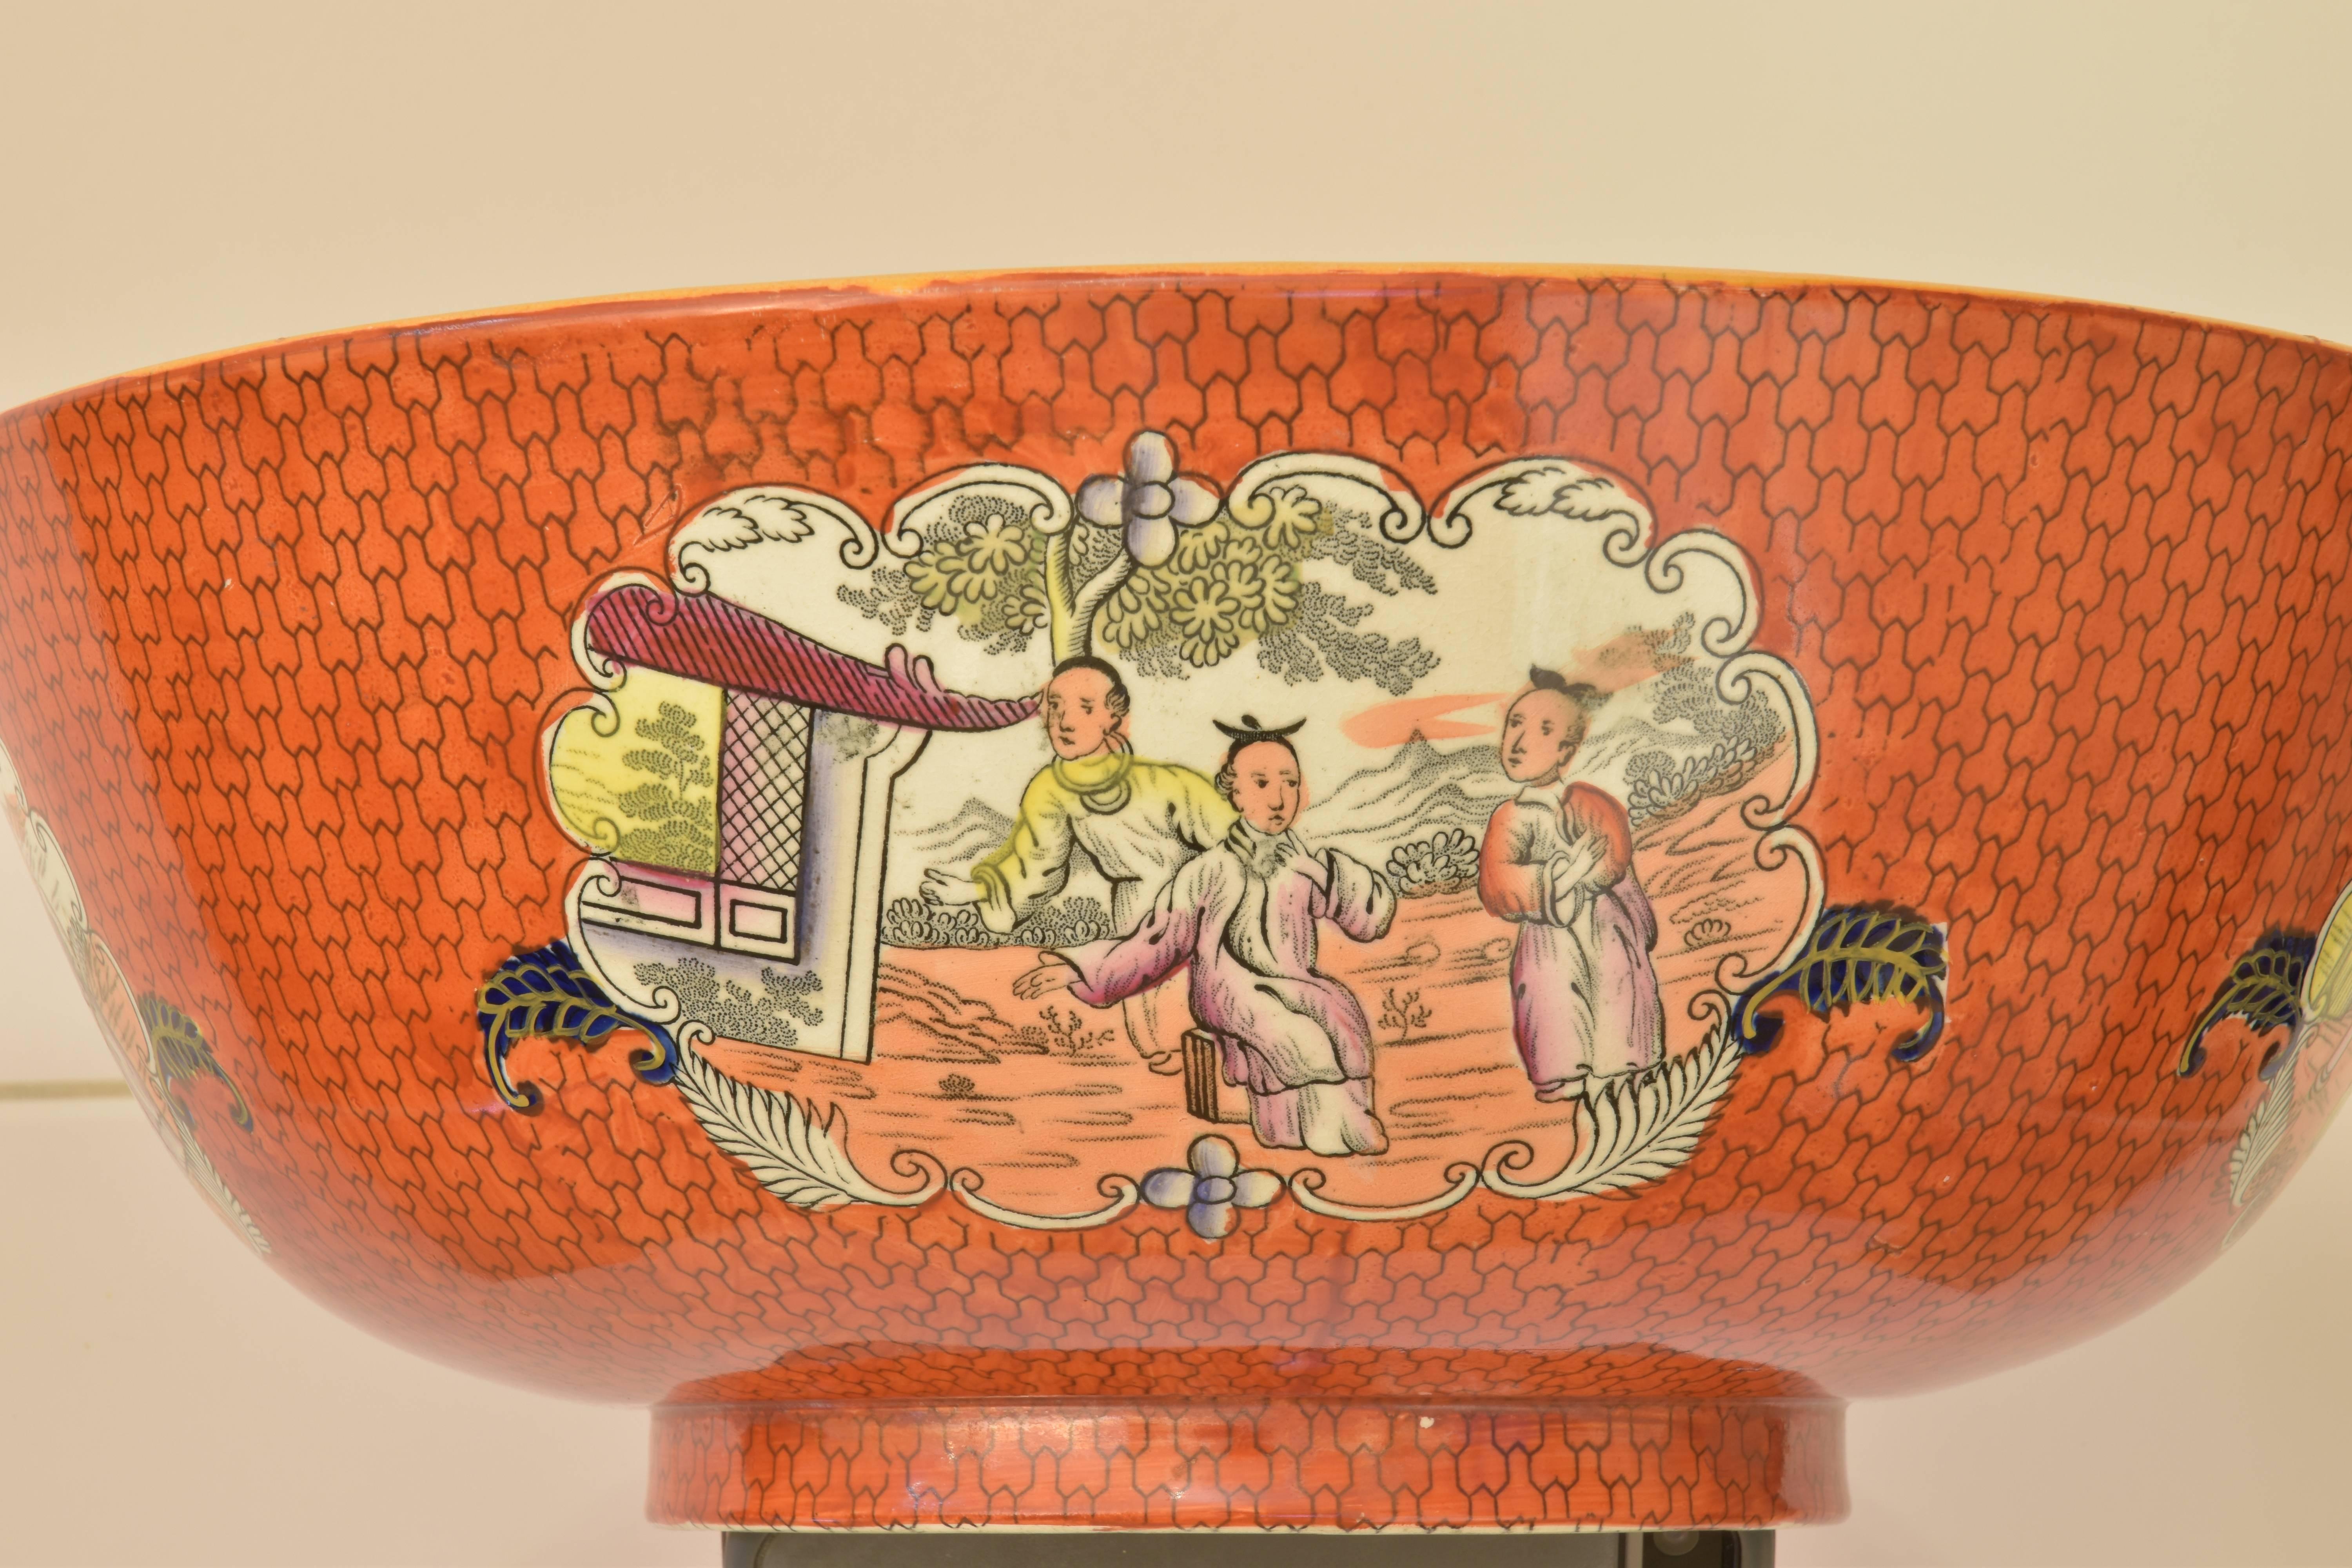 A Mason's Ironstone punch bowl in a striking salmon coloration with accents of green, yellow and deep blue with chinoiserie figural ornamentation on four sides of the bowl and in the centre of the interior of the bowl. A beautiful and highly